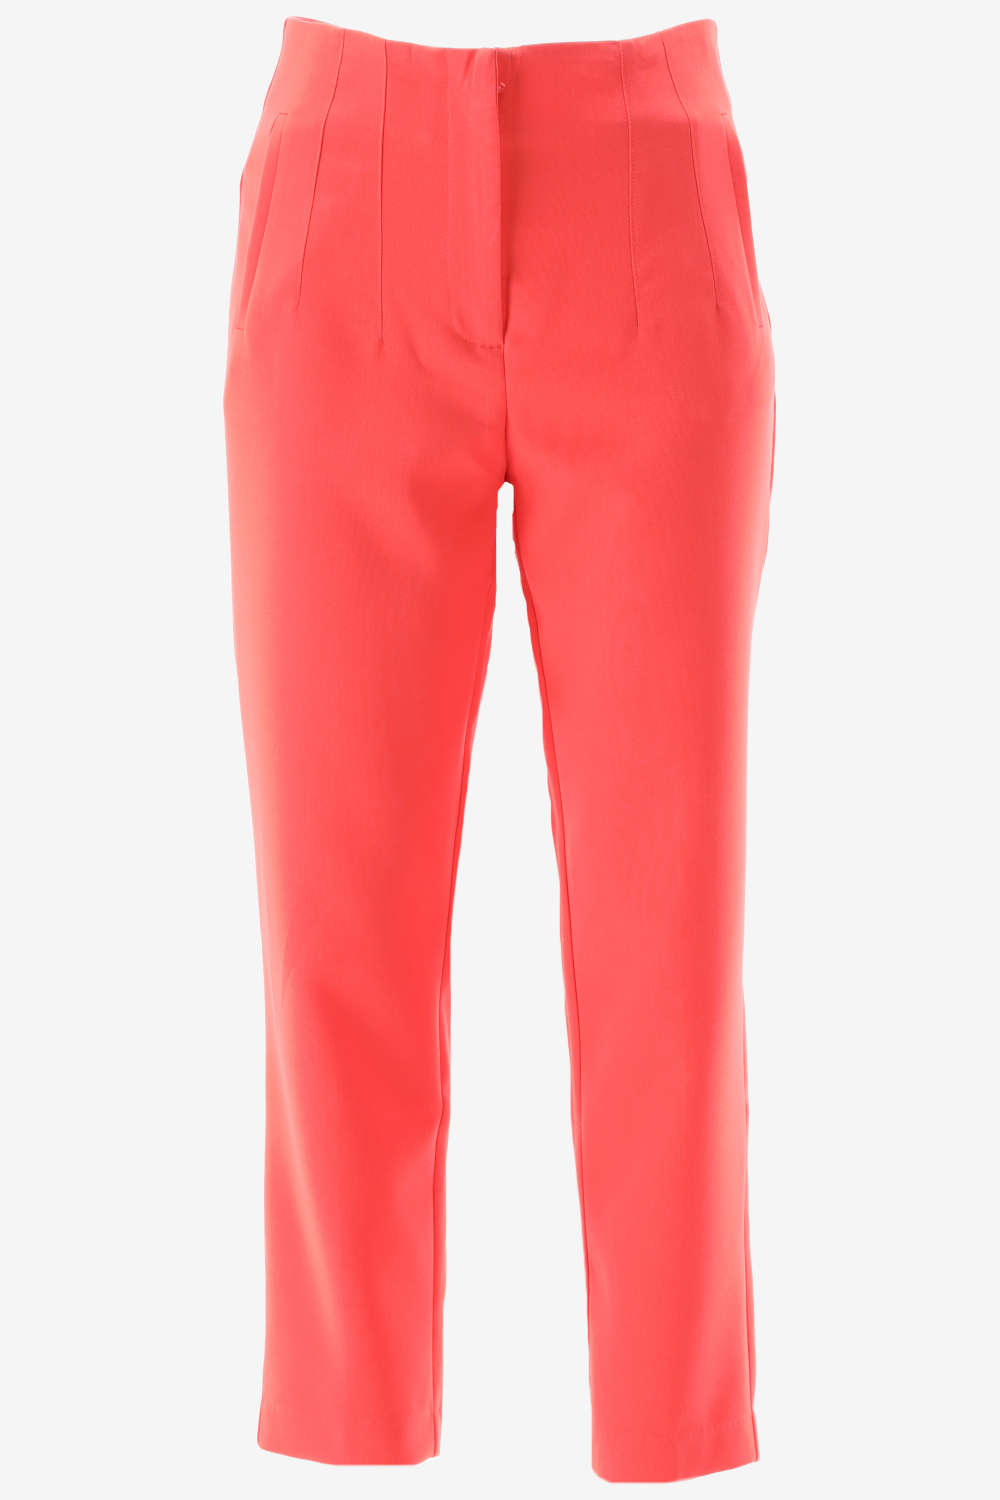 Only Onlraven Hw Pant Cayenne L32 ROOD 40